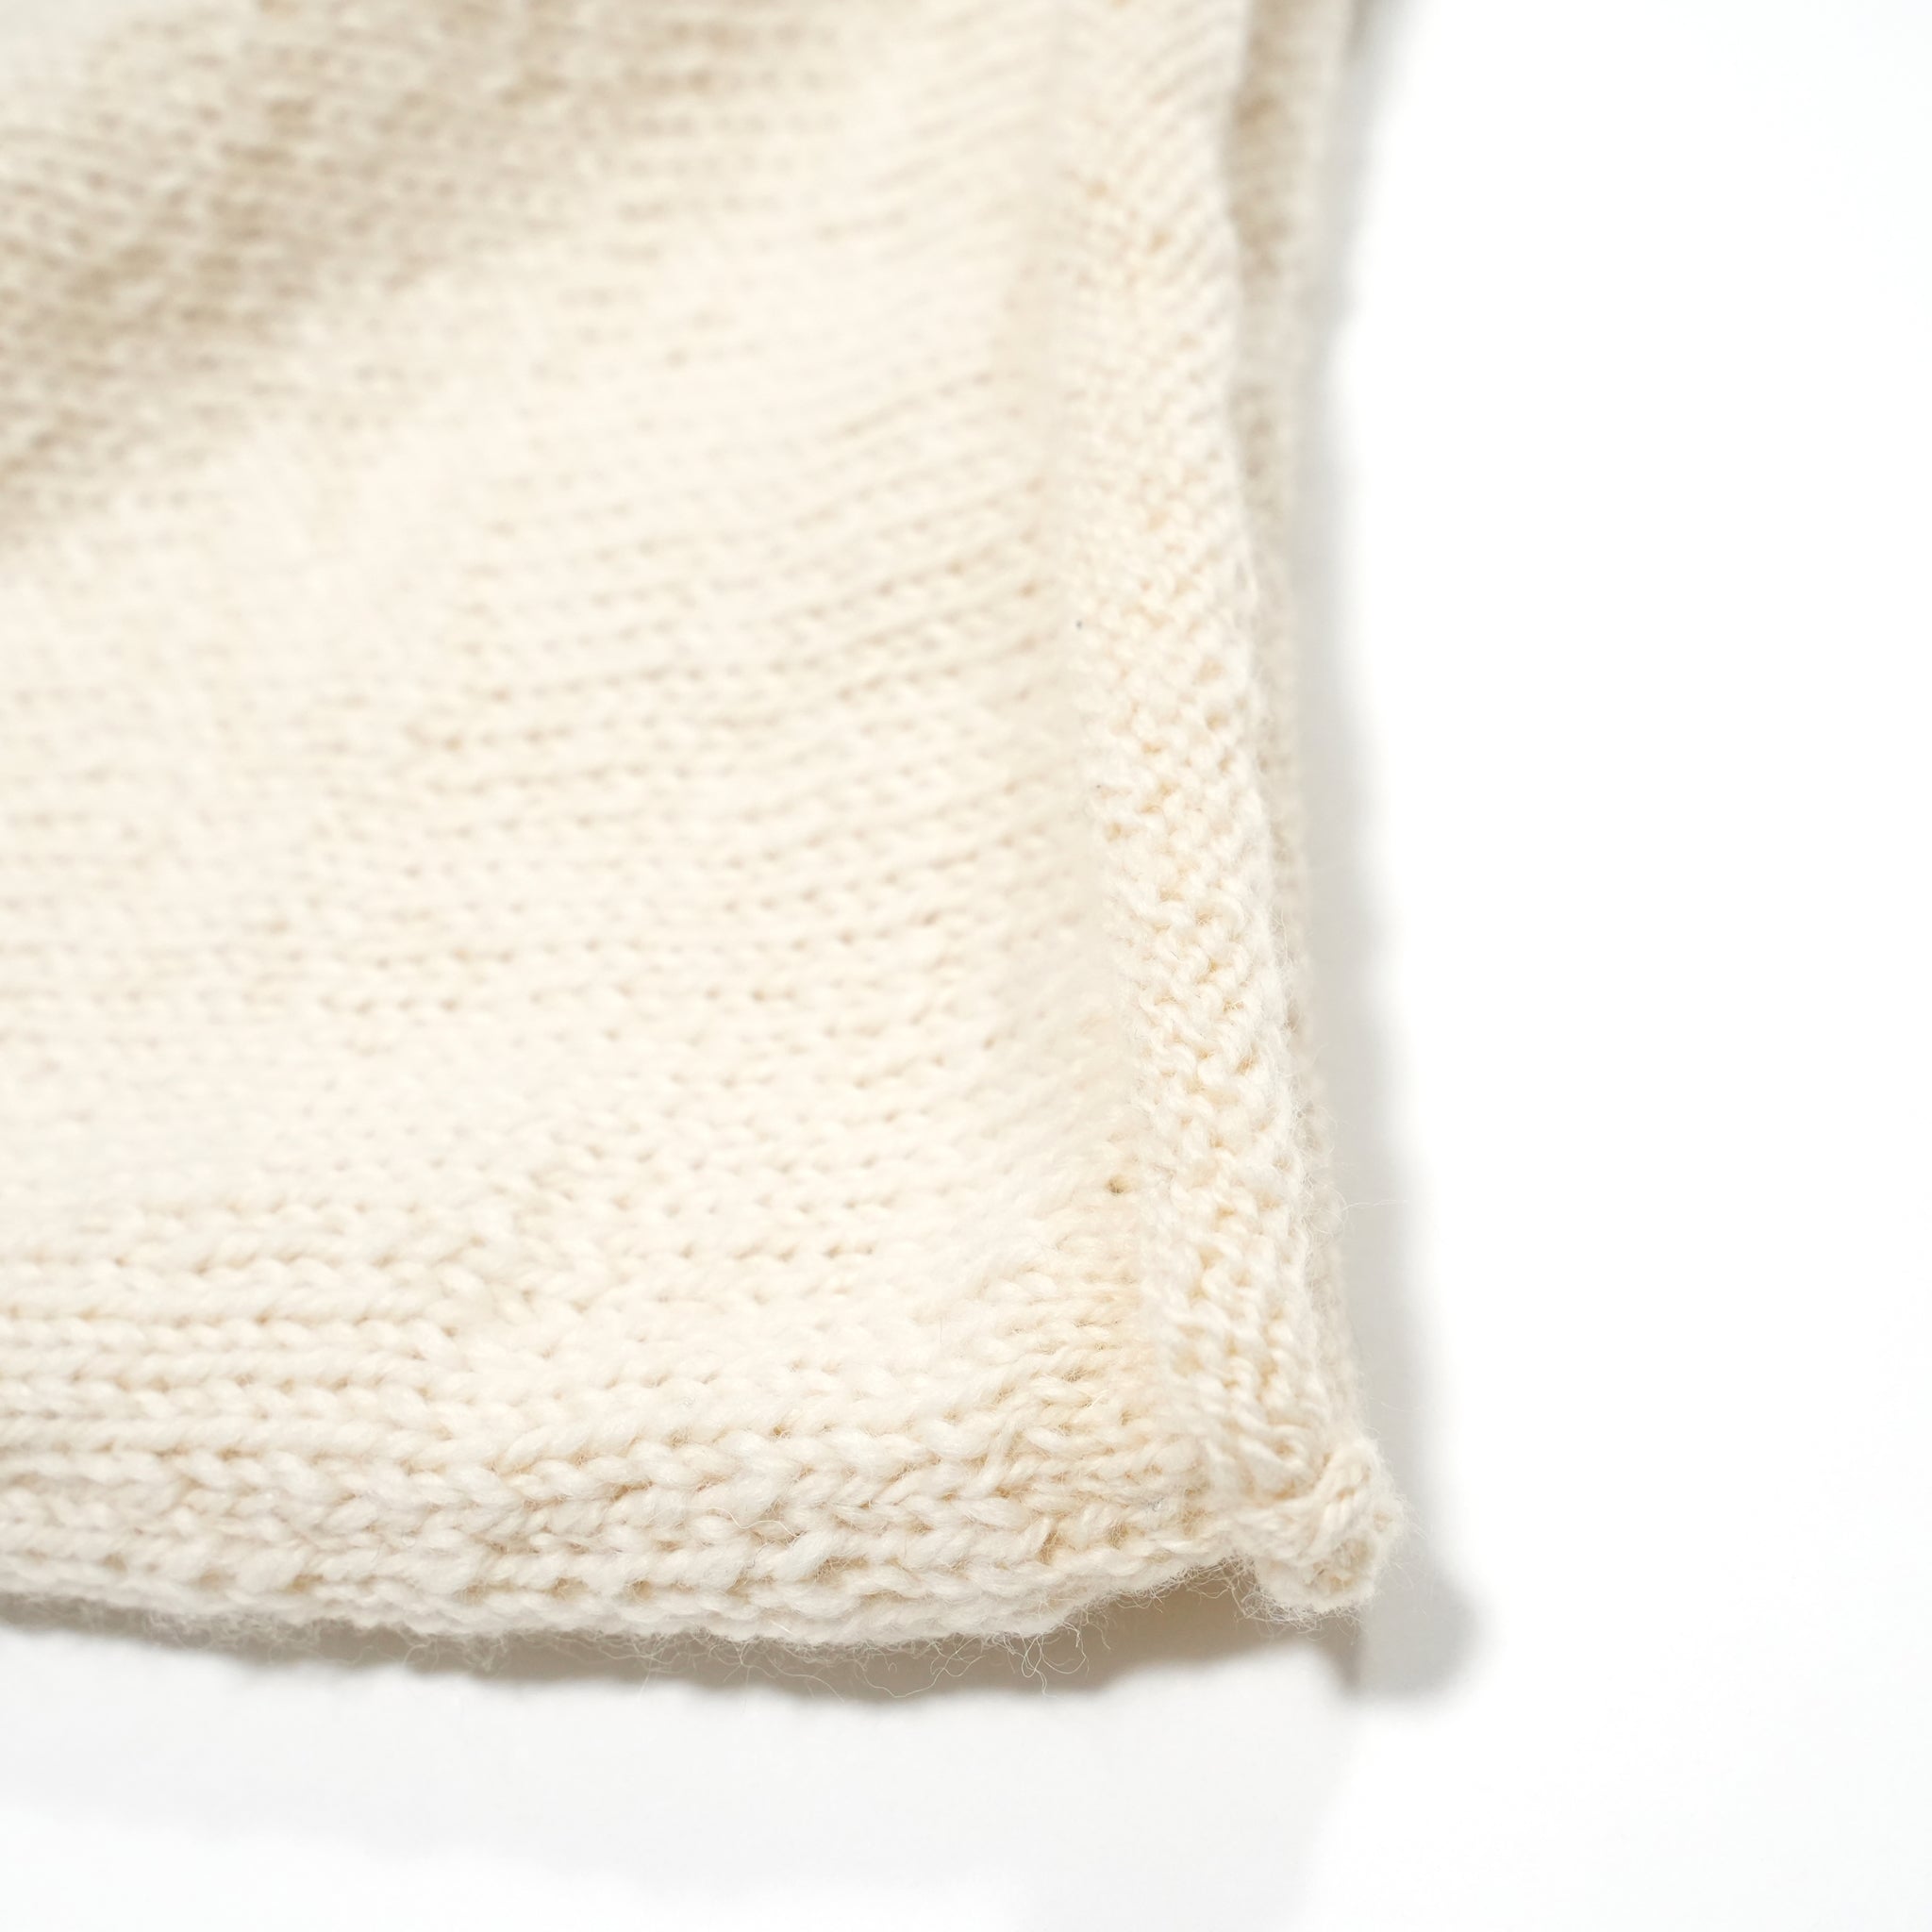 Name: Yin-Yang Hand Knit (NATURAL) | Color: Natural | Size: One Size 【CITYLIGHTS PRODUCTS_シティライツプロダクツ】